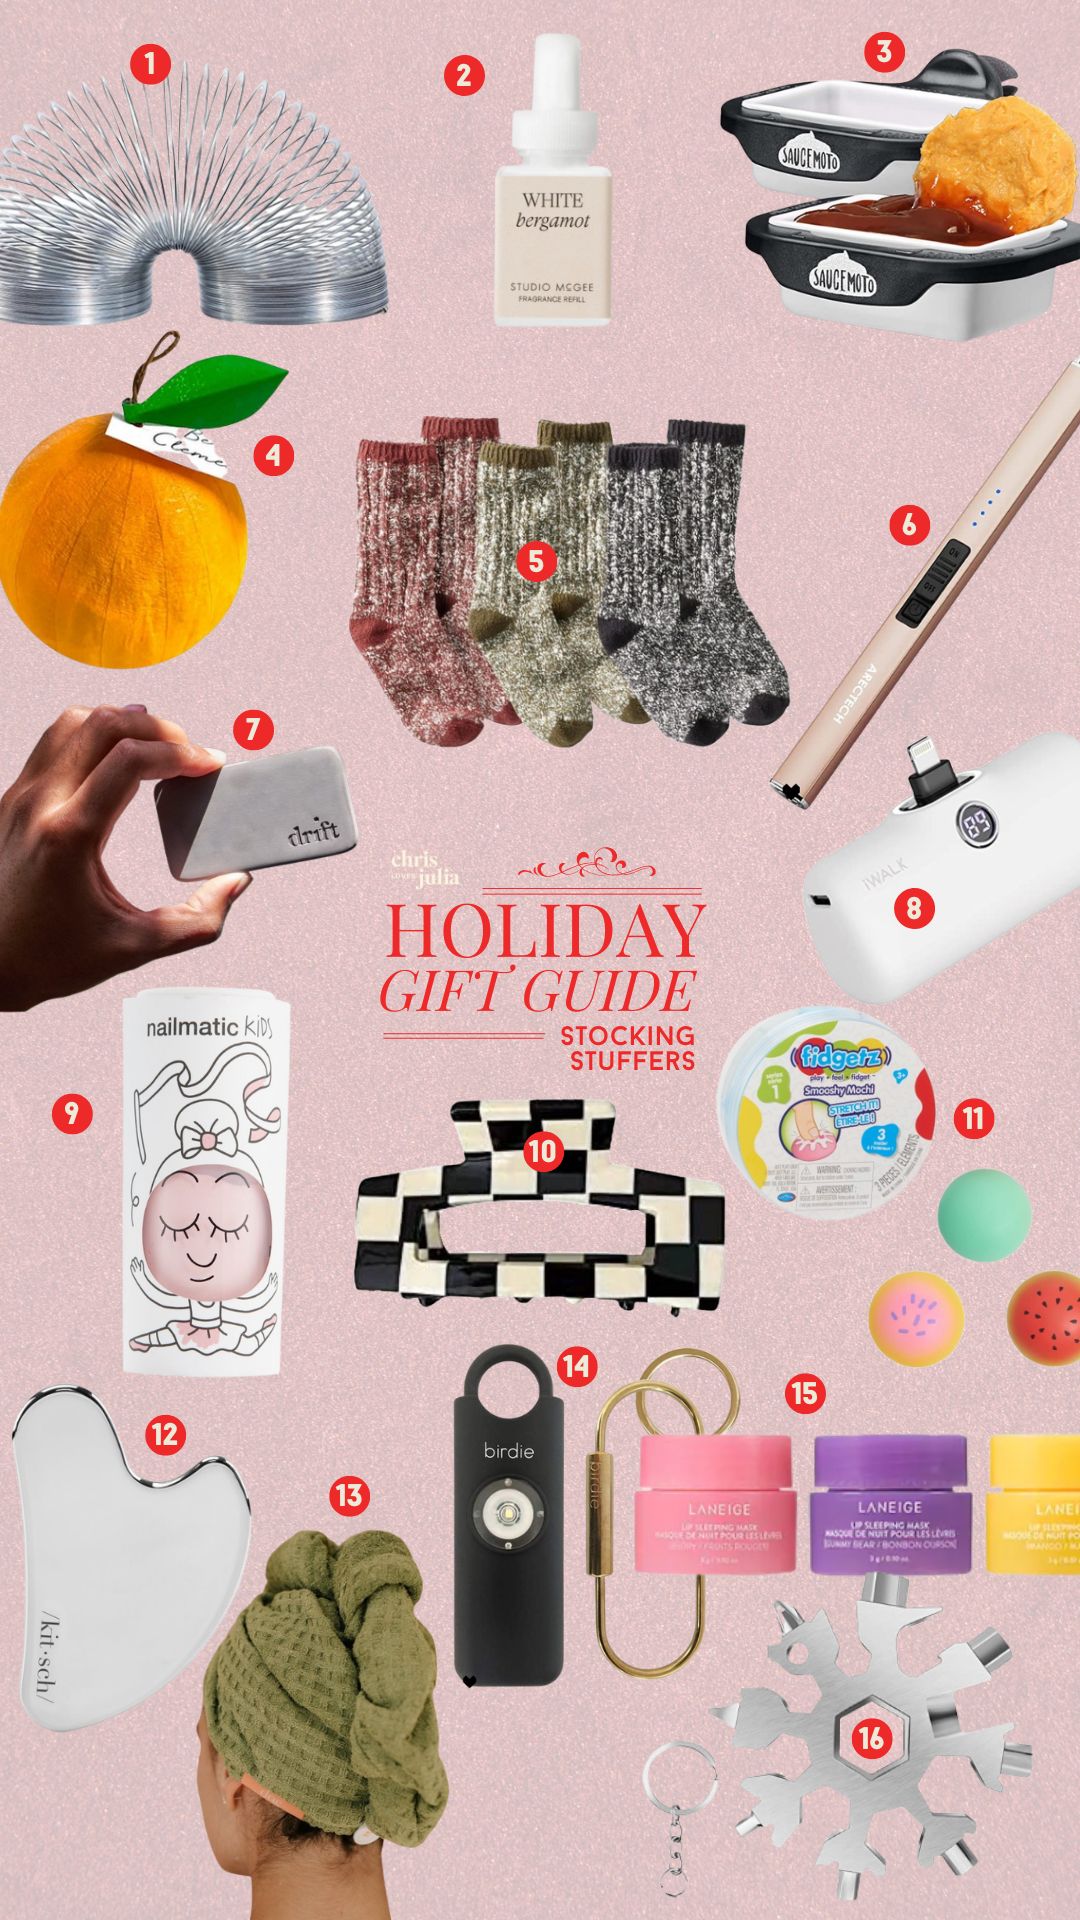 Gift Guide For Stocking Stuffers – Home Treasures & More